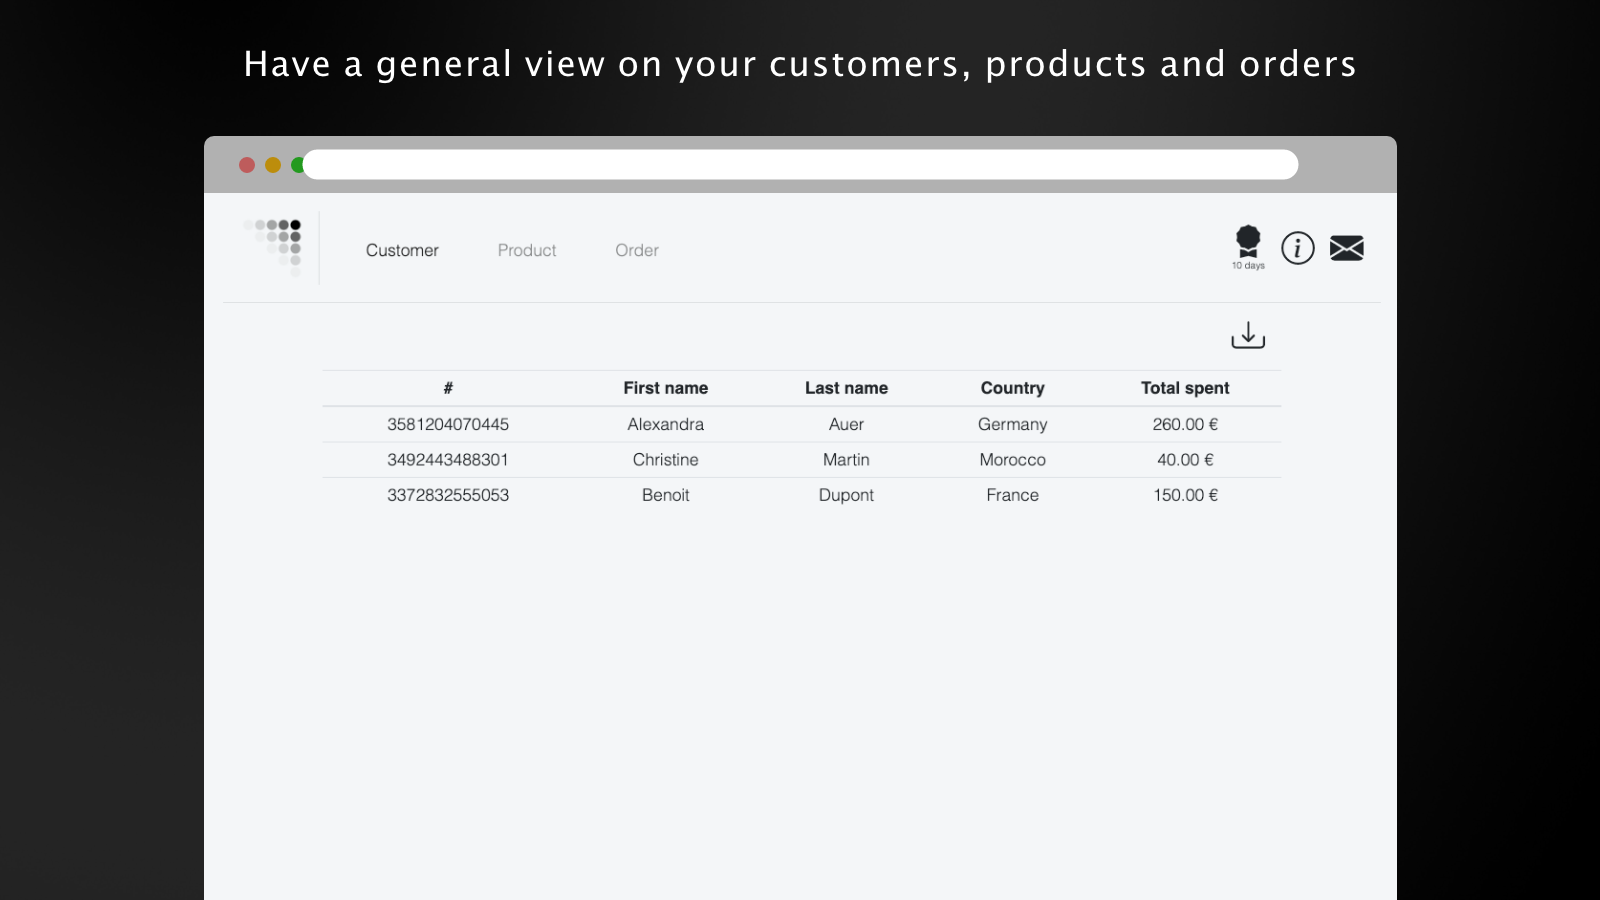 Have a general view on your customers, products and orders